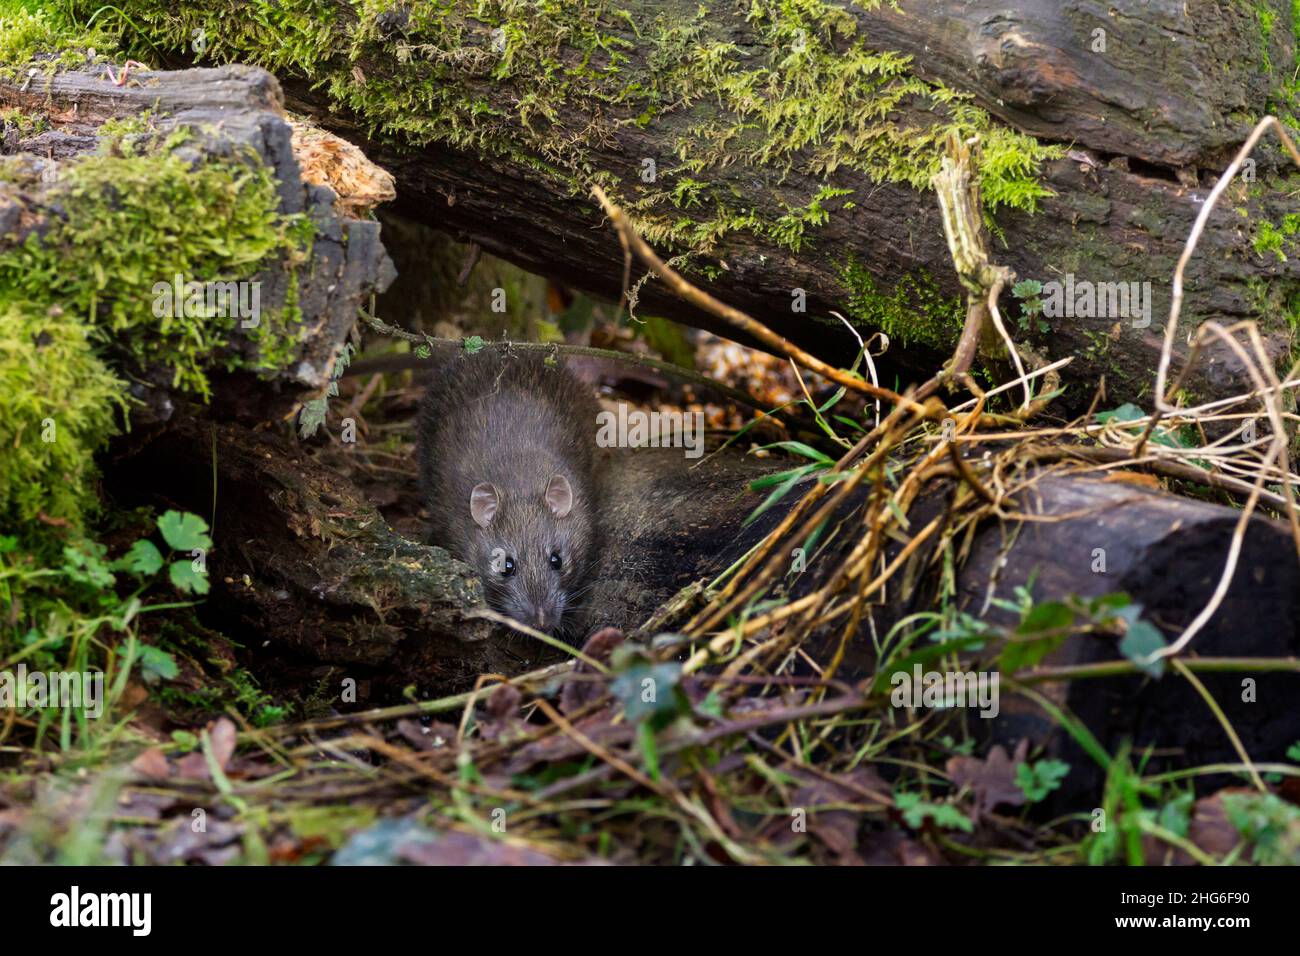 Rat brown (Rattus norvegicus) rodent grey brown fur small ears long thick scaly tail pointed face small black eyes under logs in bird hide eating seed Stock Photo